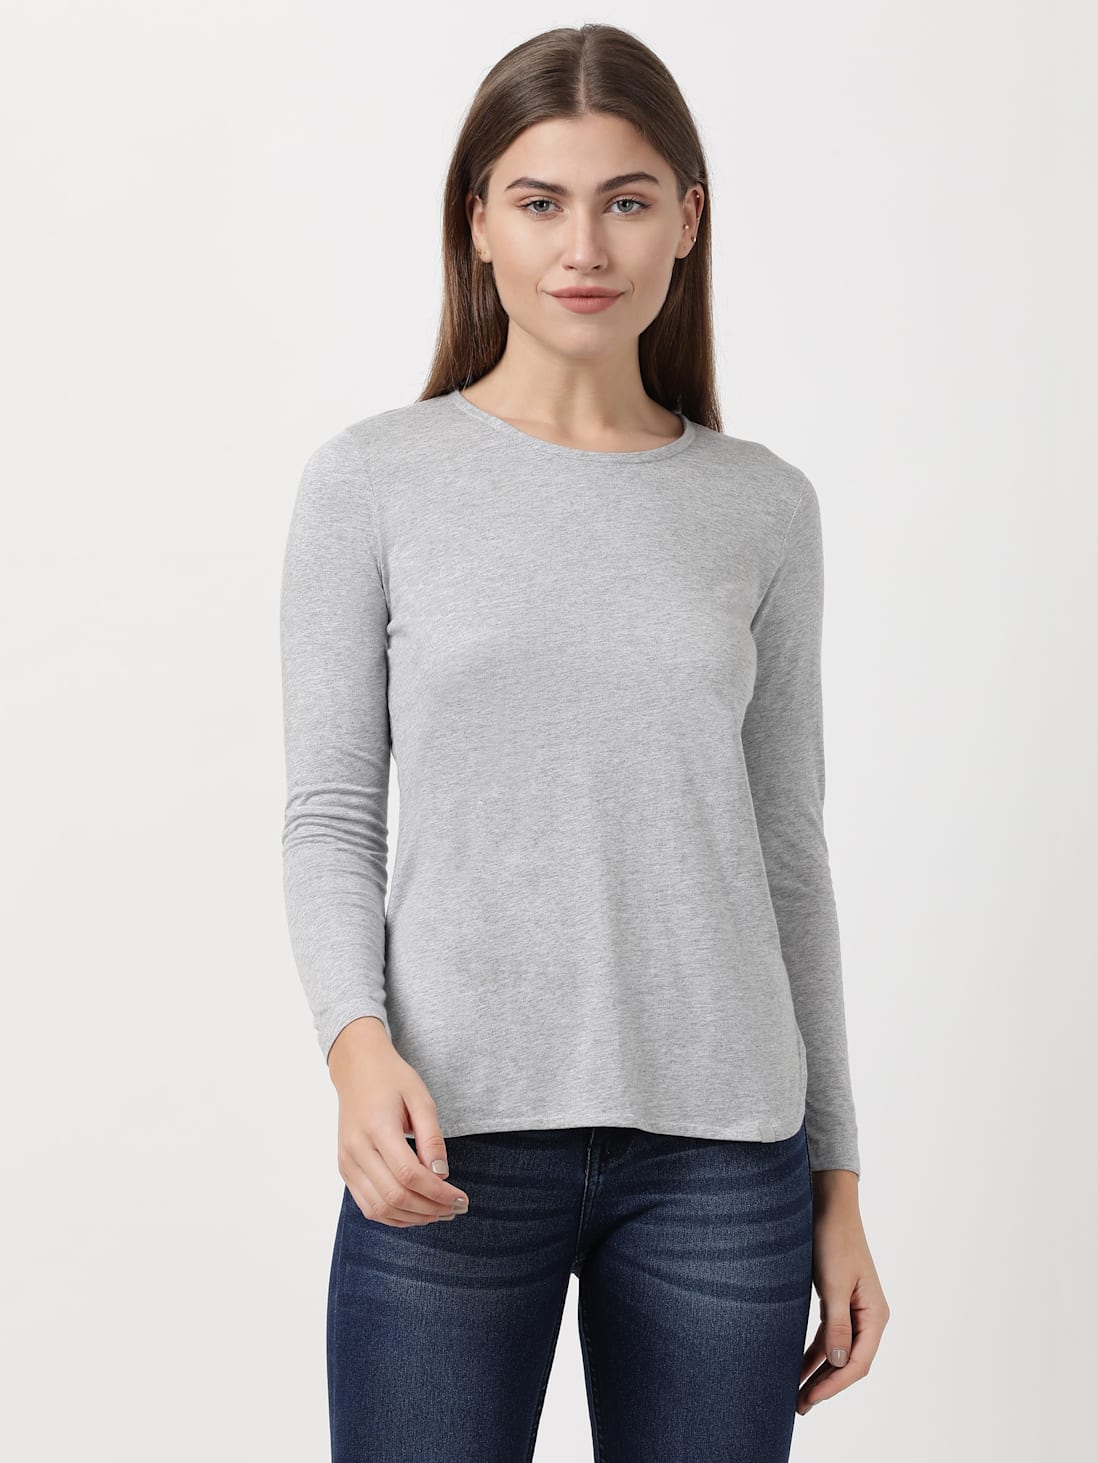 Buy Women's Micro Modal Cotton Relaxed Fit Solid Round Neck Full Sleeve  T-Shirt - Light Grey Melange RX21